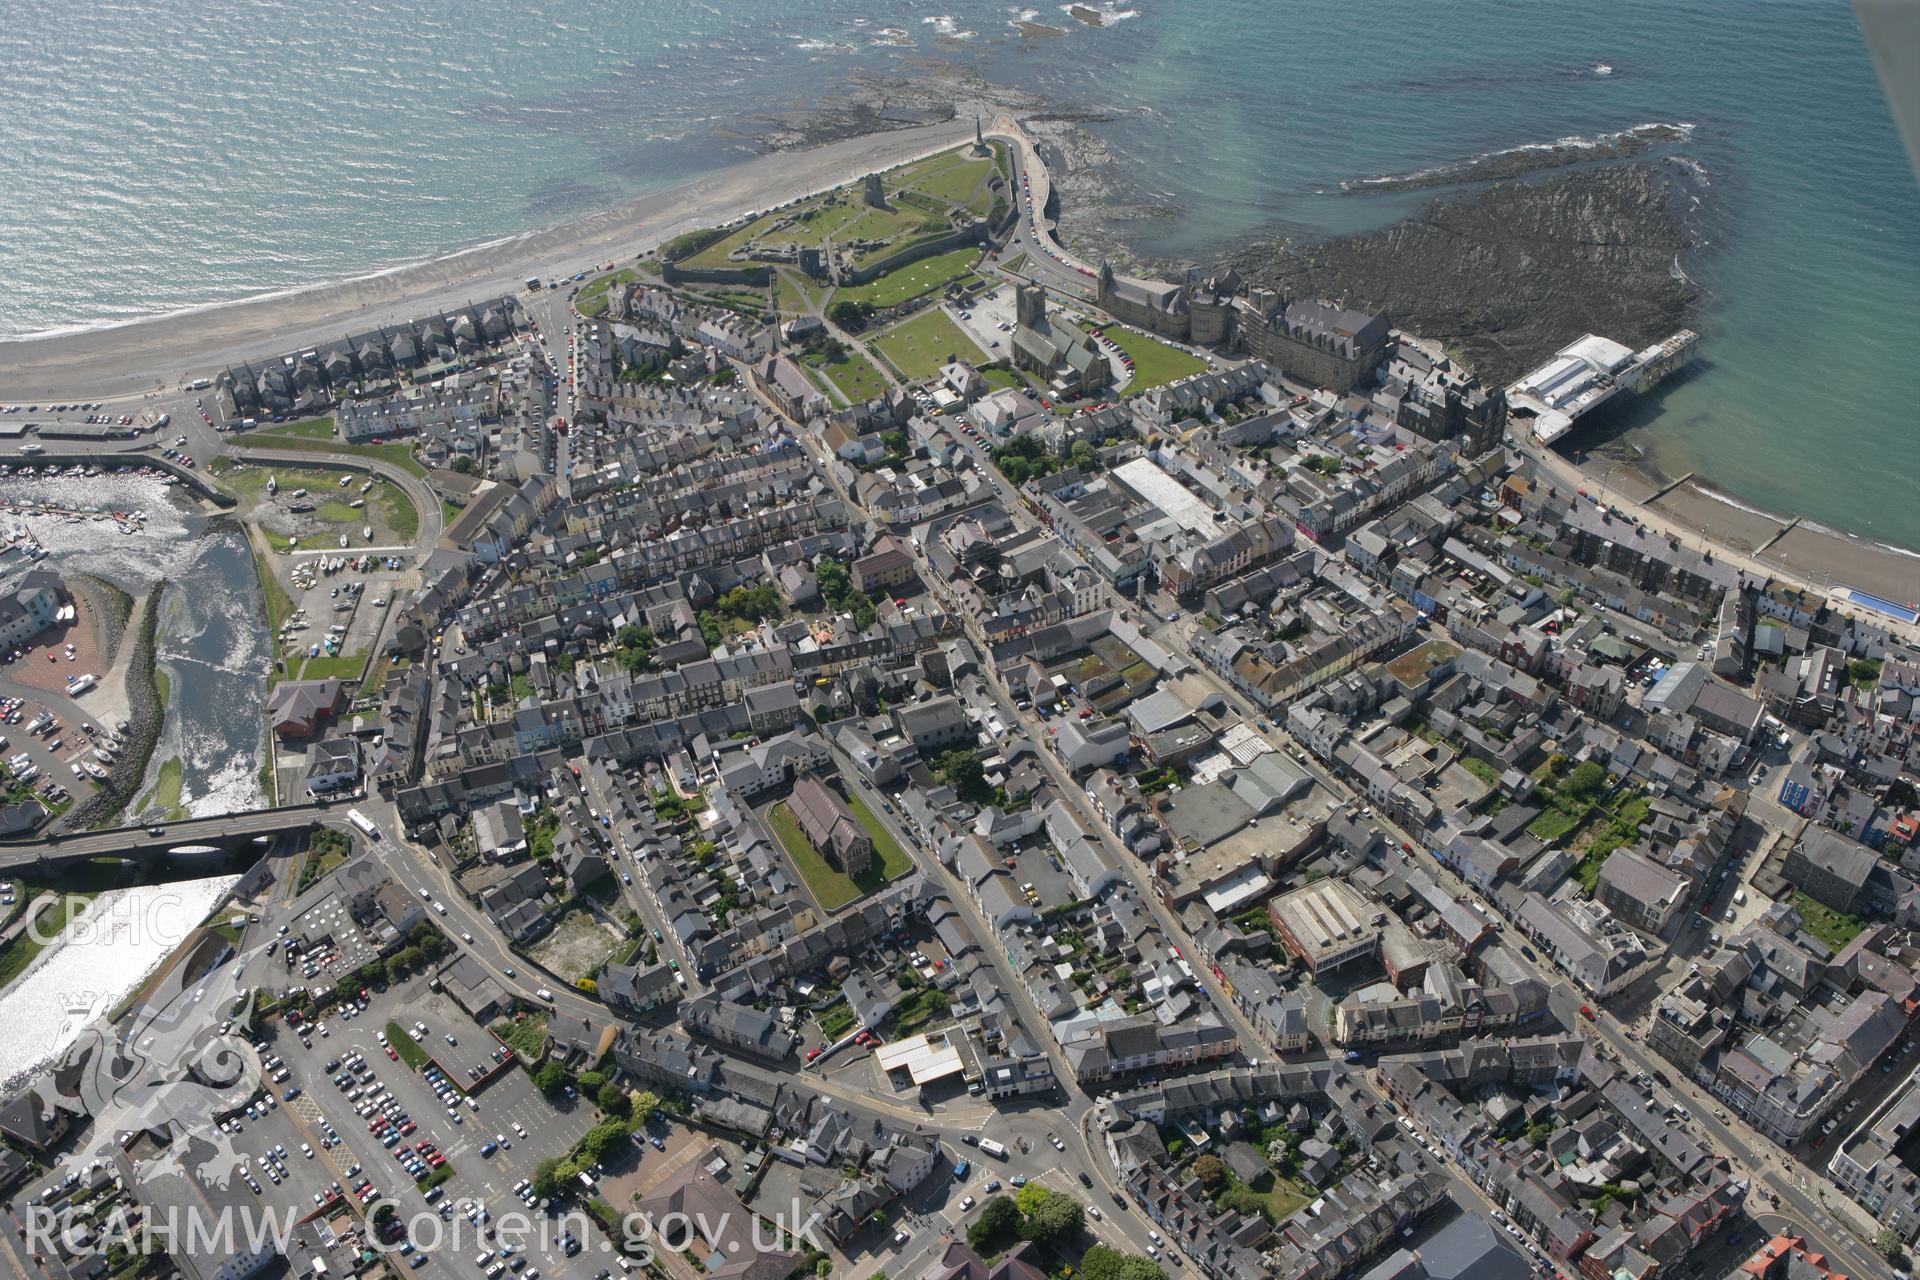 RCAHMW colour oblique photograph of Aberystwyth. Taken by Toby Driver on 25/05/2010.